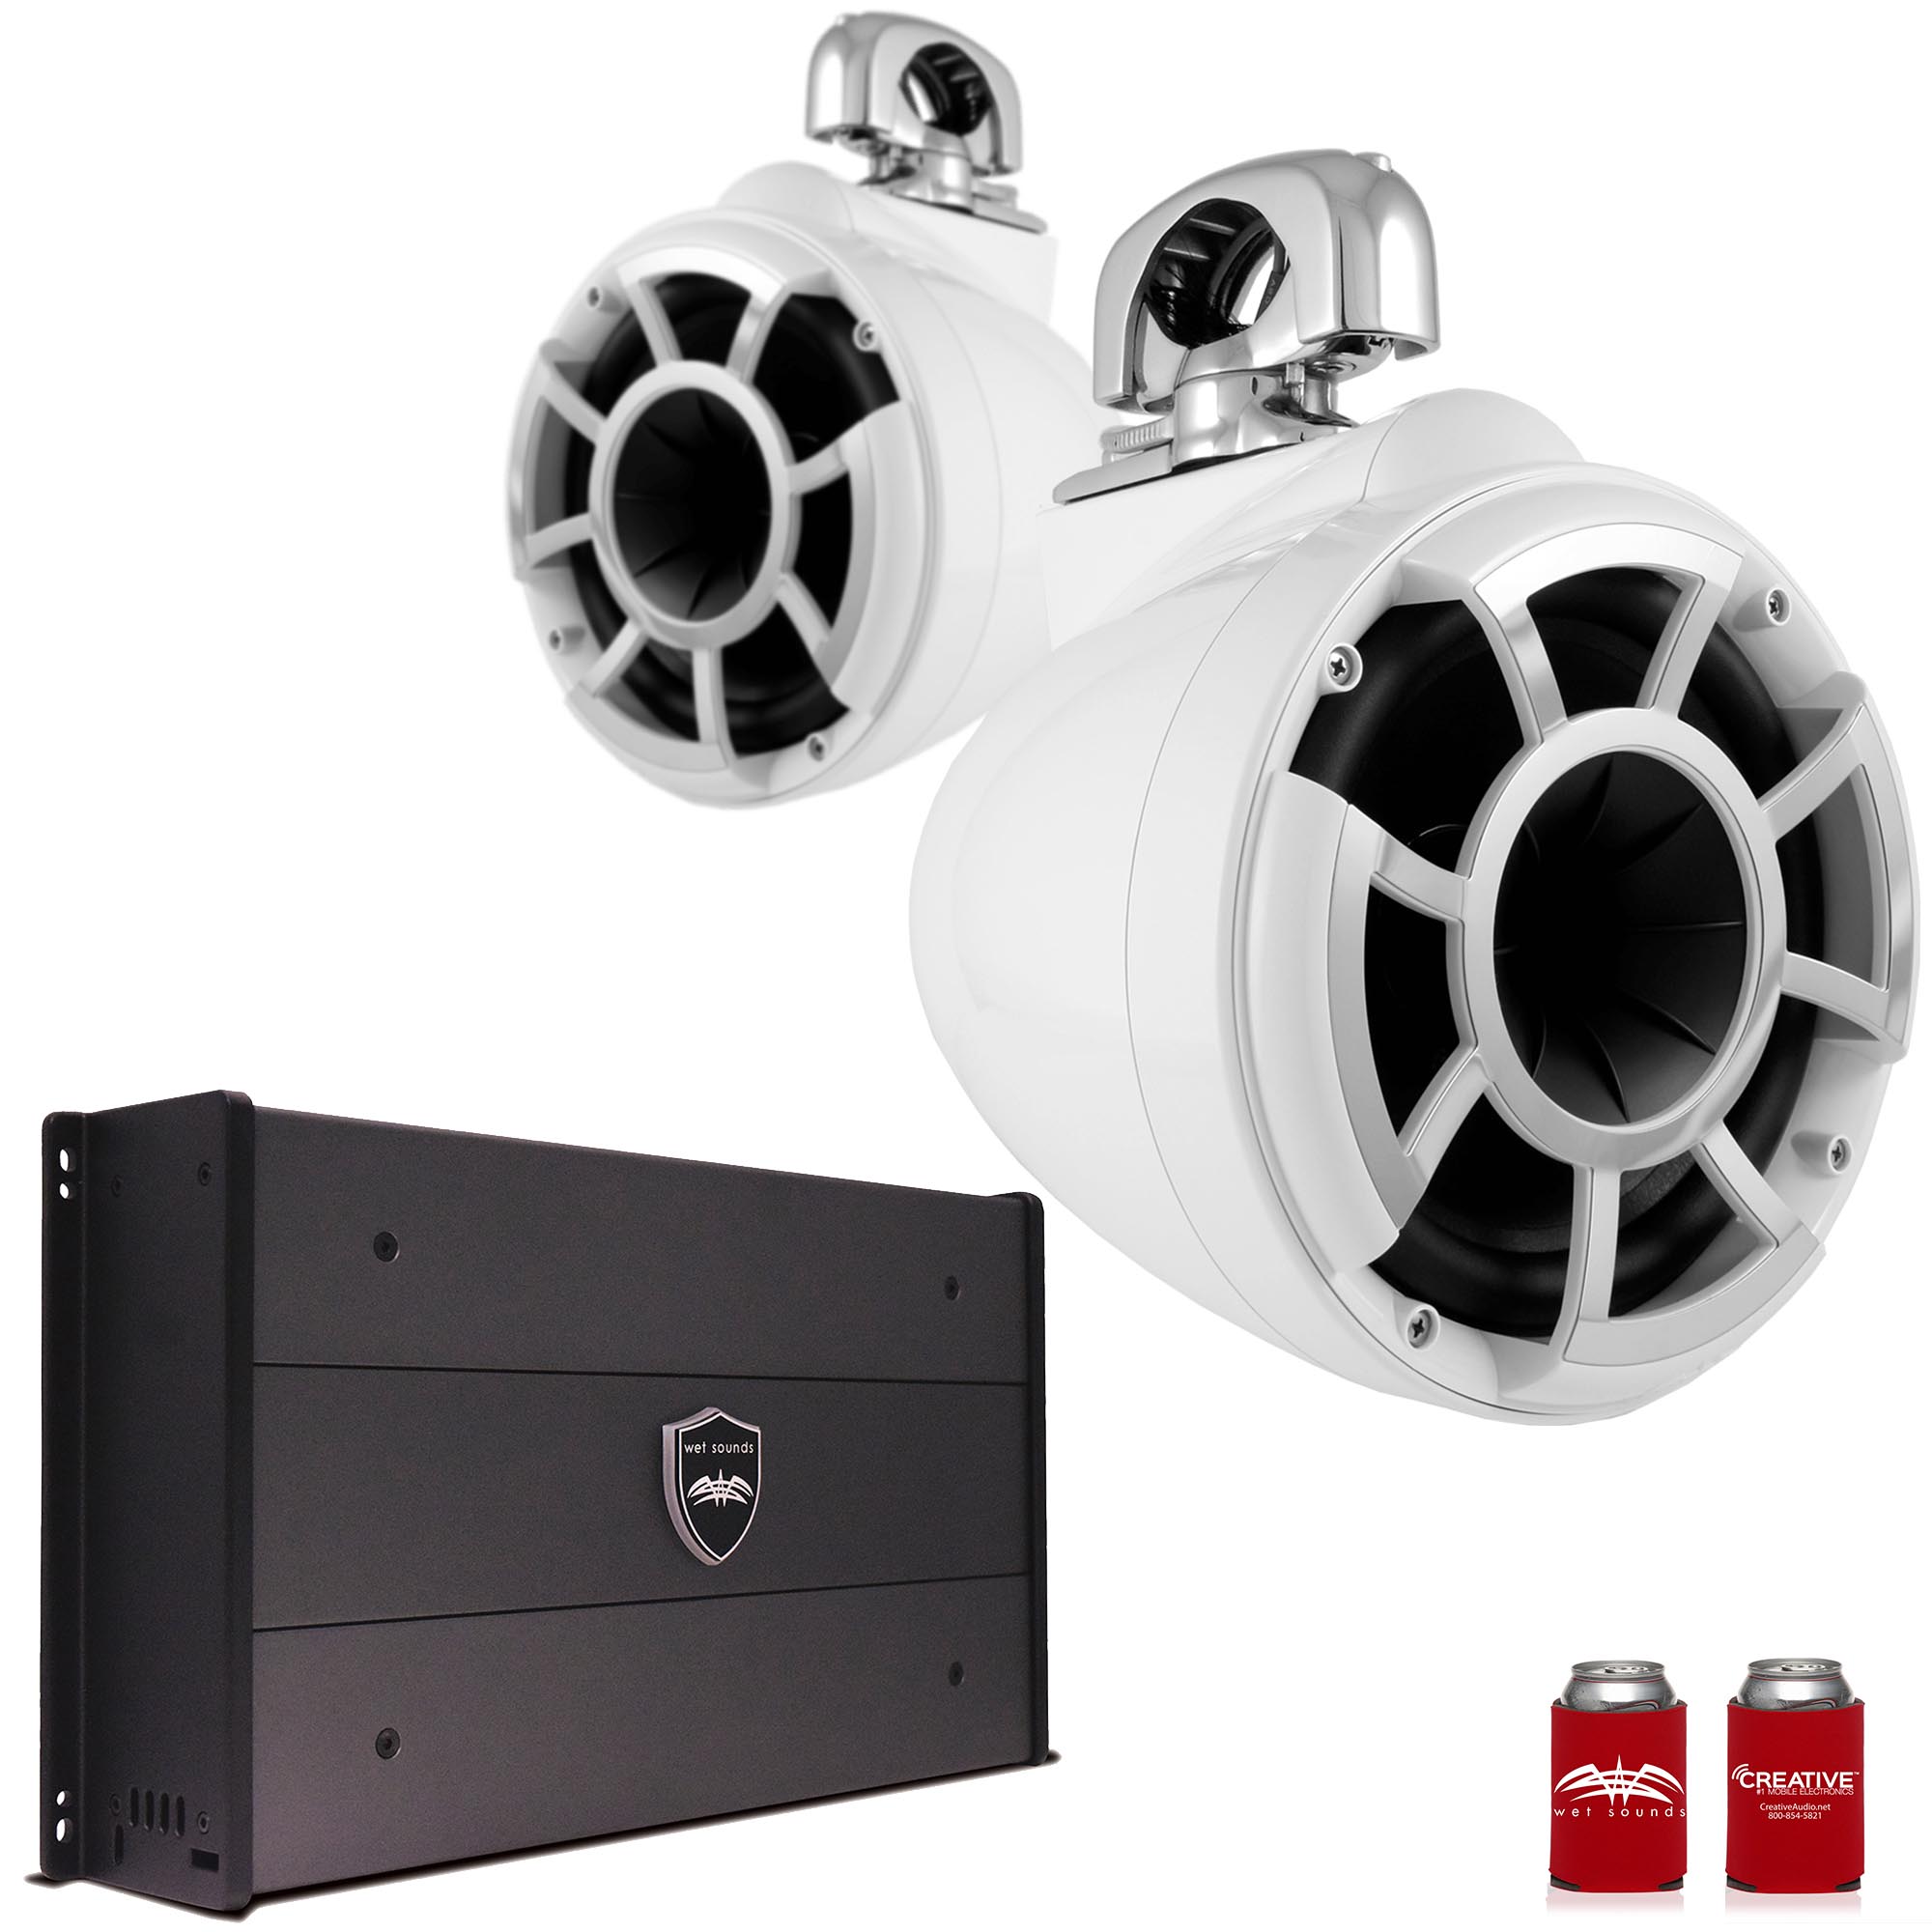 Wet Sounds REV8W-SC 8" White Tower Speakers with Stainless Steel Swivel Clamps & SYN-DX2.3 1200 Watt Amplifier